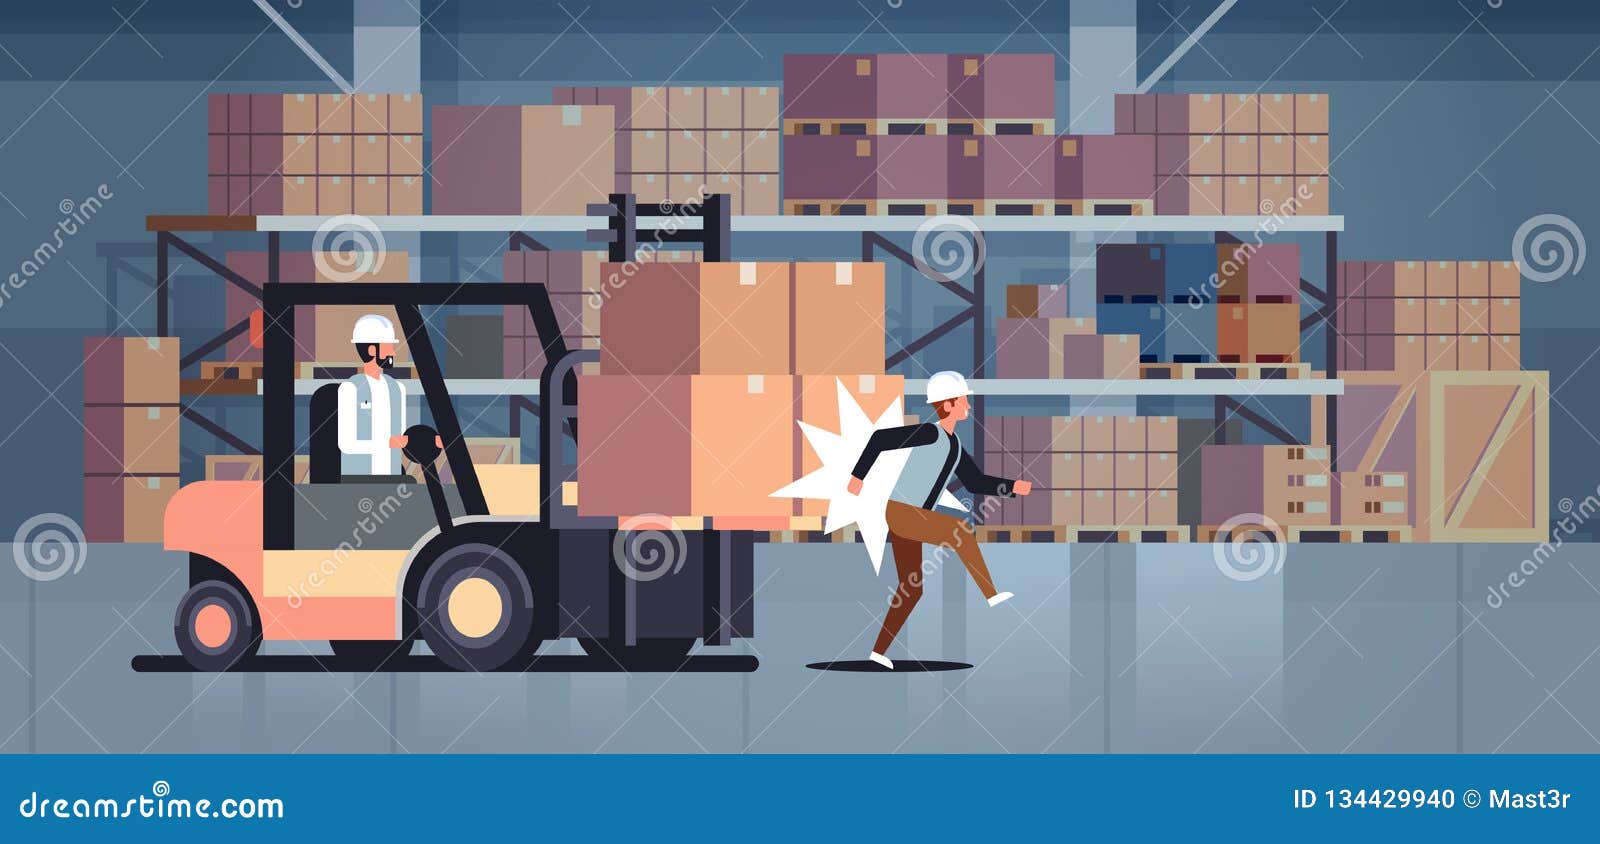 Forklift Driver Hitting Colleague Factory Accident Concept Warehouse Logistic Transport Driver Dangerous Injured Worker Stock Vector Illustration Of Horizontal Help 134429940